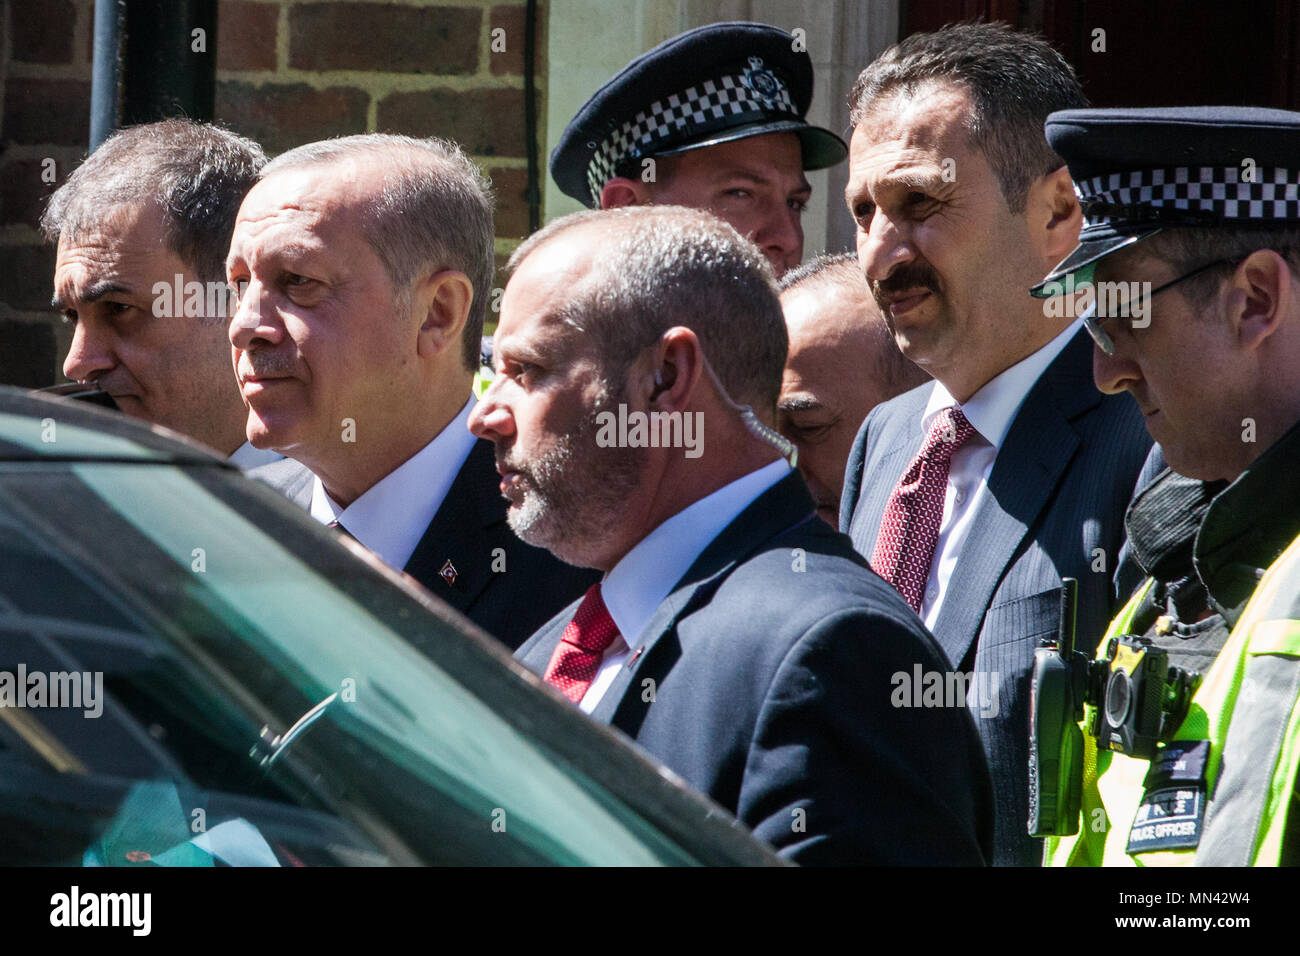 London, UK. 14th May, 2018. Turkish President Recep Tayyip Erdoğan leaves  Chatham House amid high security after making a speech about Turkey's  “global vision” as part of his 3-day state visit to